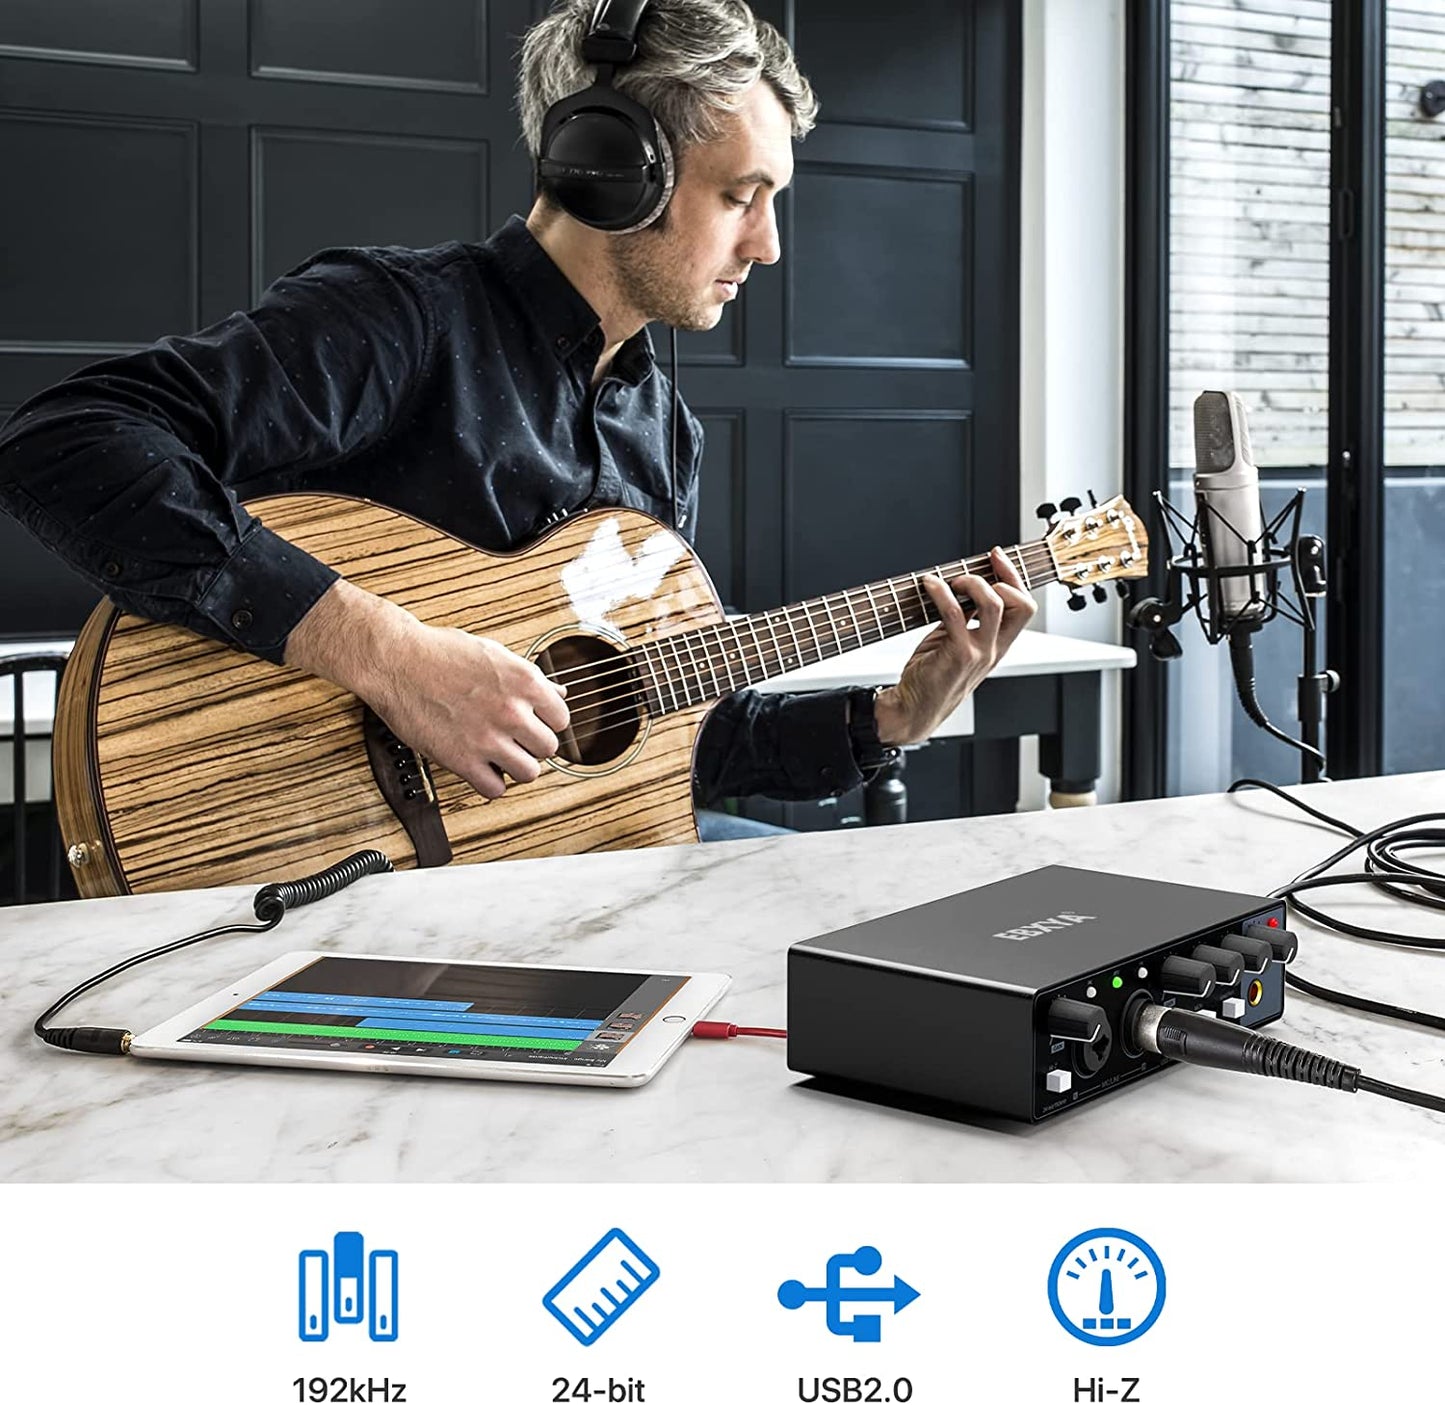 Professional-Grade 2X2 USB Audio Interface for High-Fidelity Recording, Streaming, and Podcasting, 24Bit/196Khz Studio-Quality Audio Interface Suitable for Guitarists, Vocalists, Podcasters, and Producers